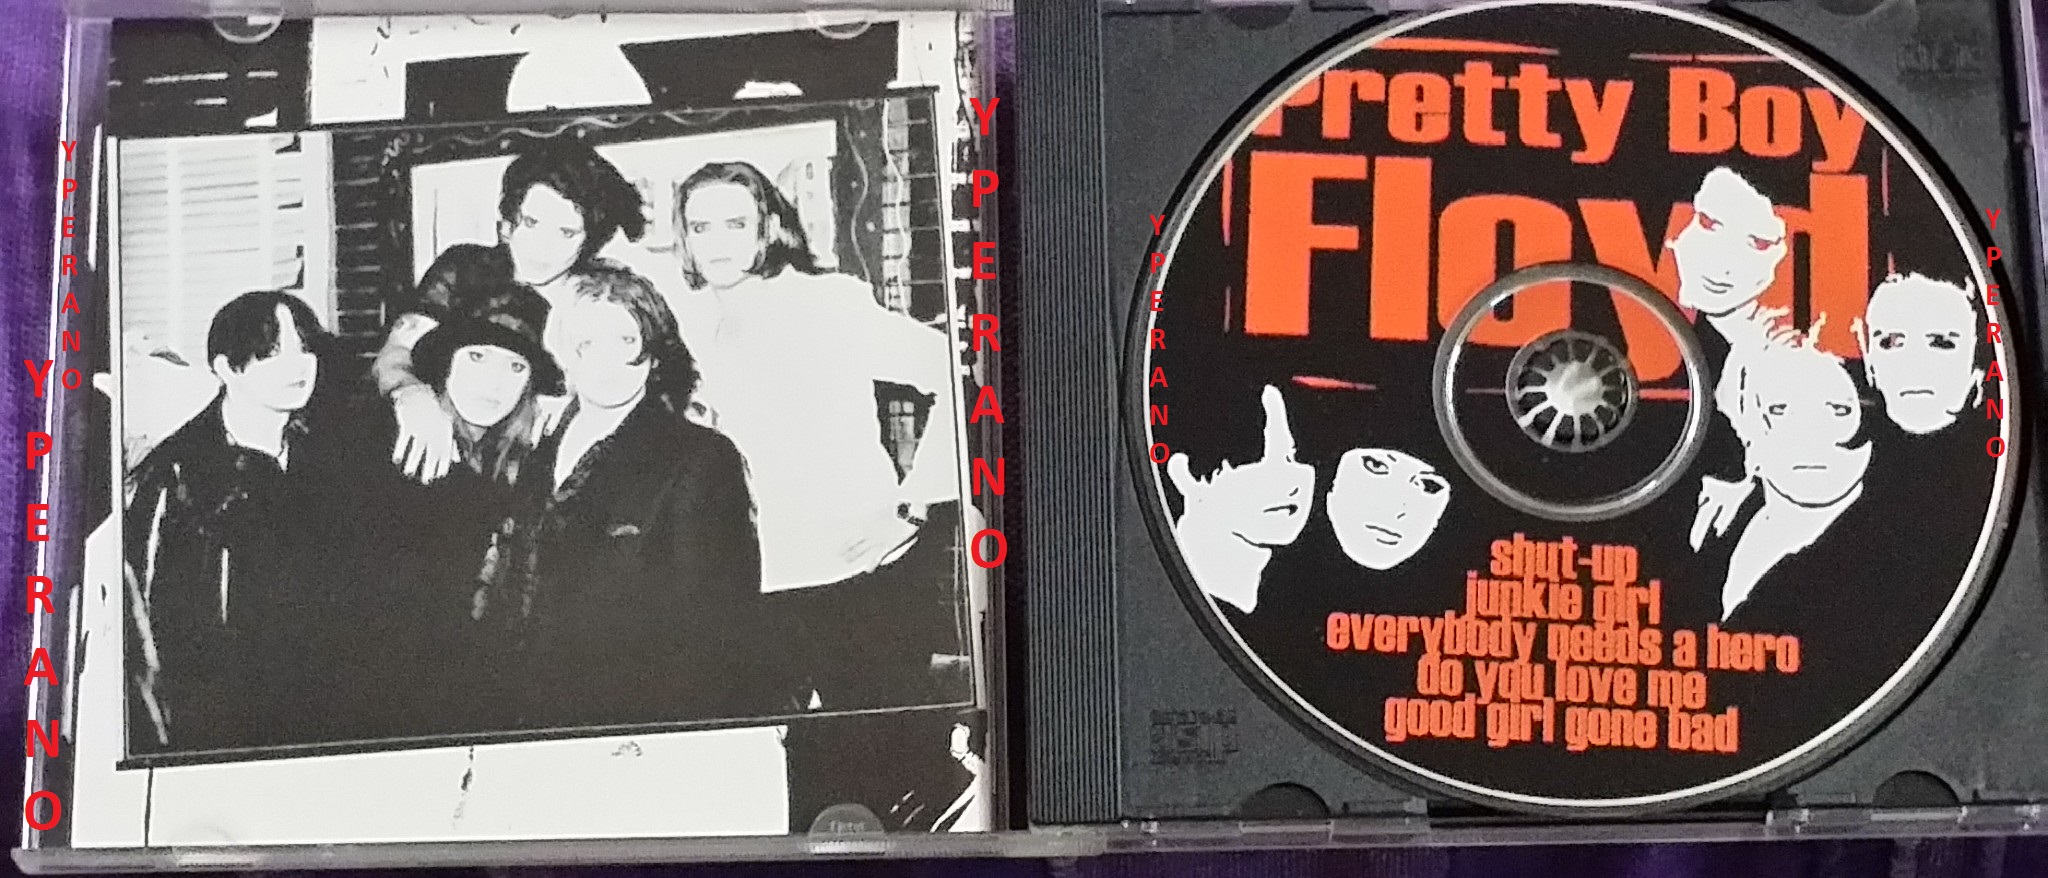 Pretty Boy Floyd CD, A Tale of Sex, Designer Drugs and the Death of Ro –  Fibits